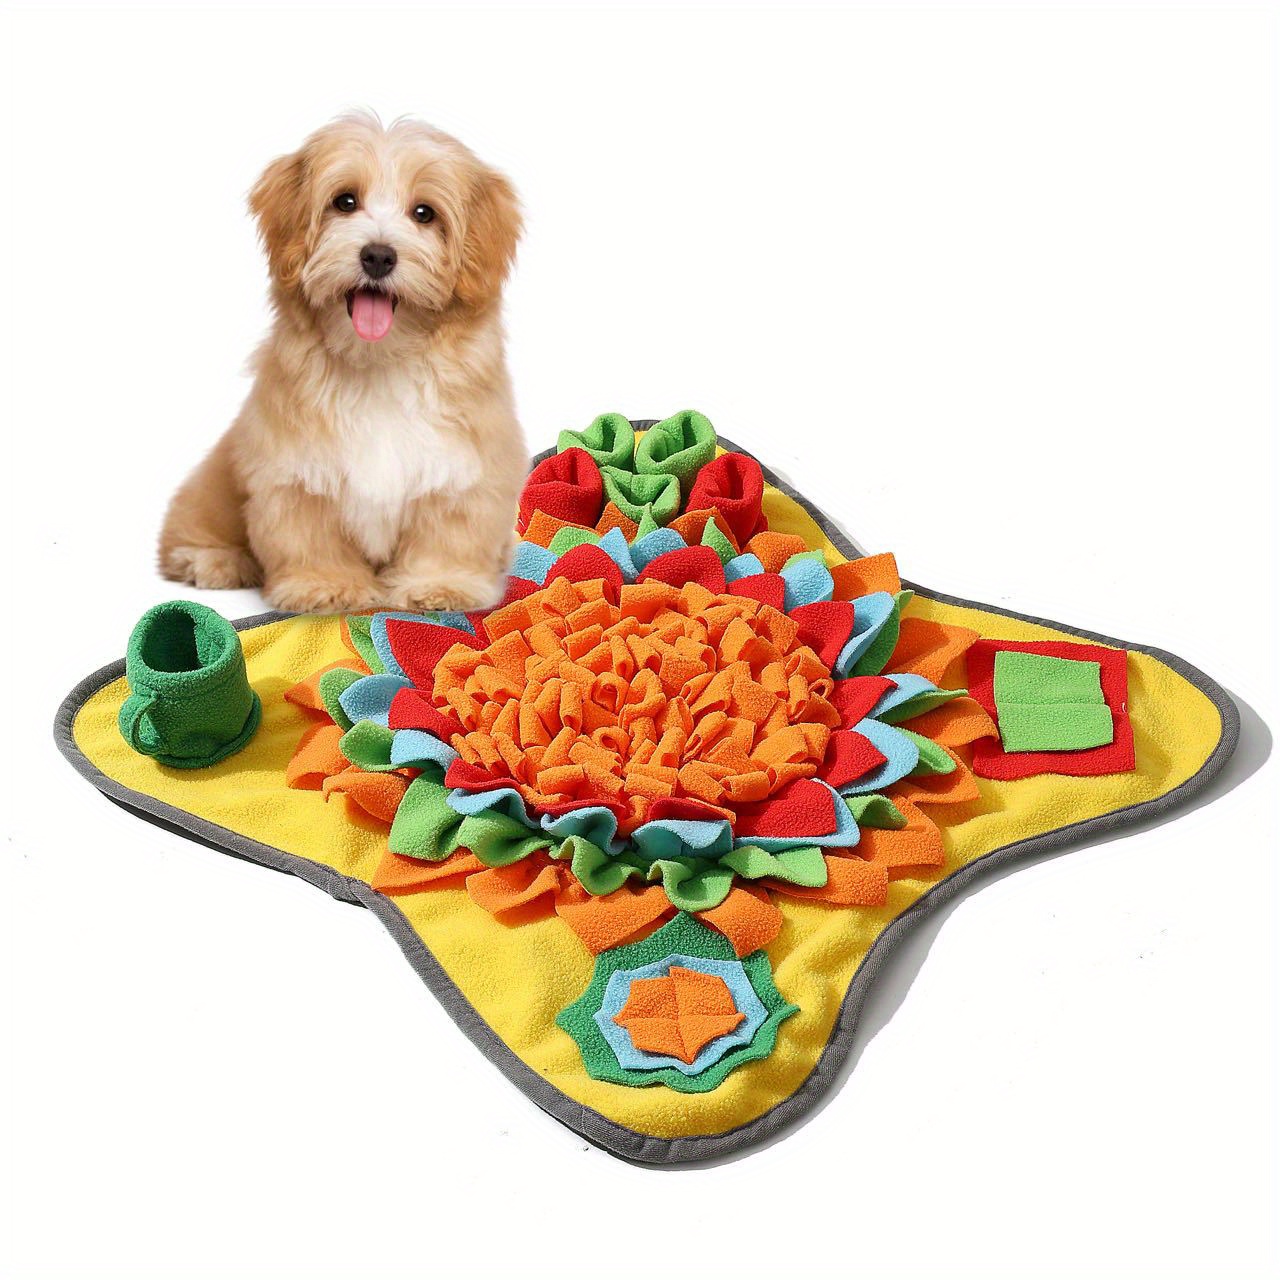 Puzzle Treat Toys Dogs, Dog Snuffle Mat, Dog Snuffle Interactive